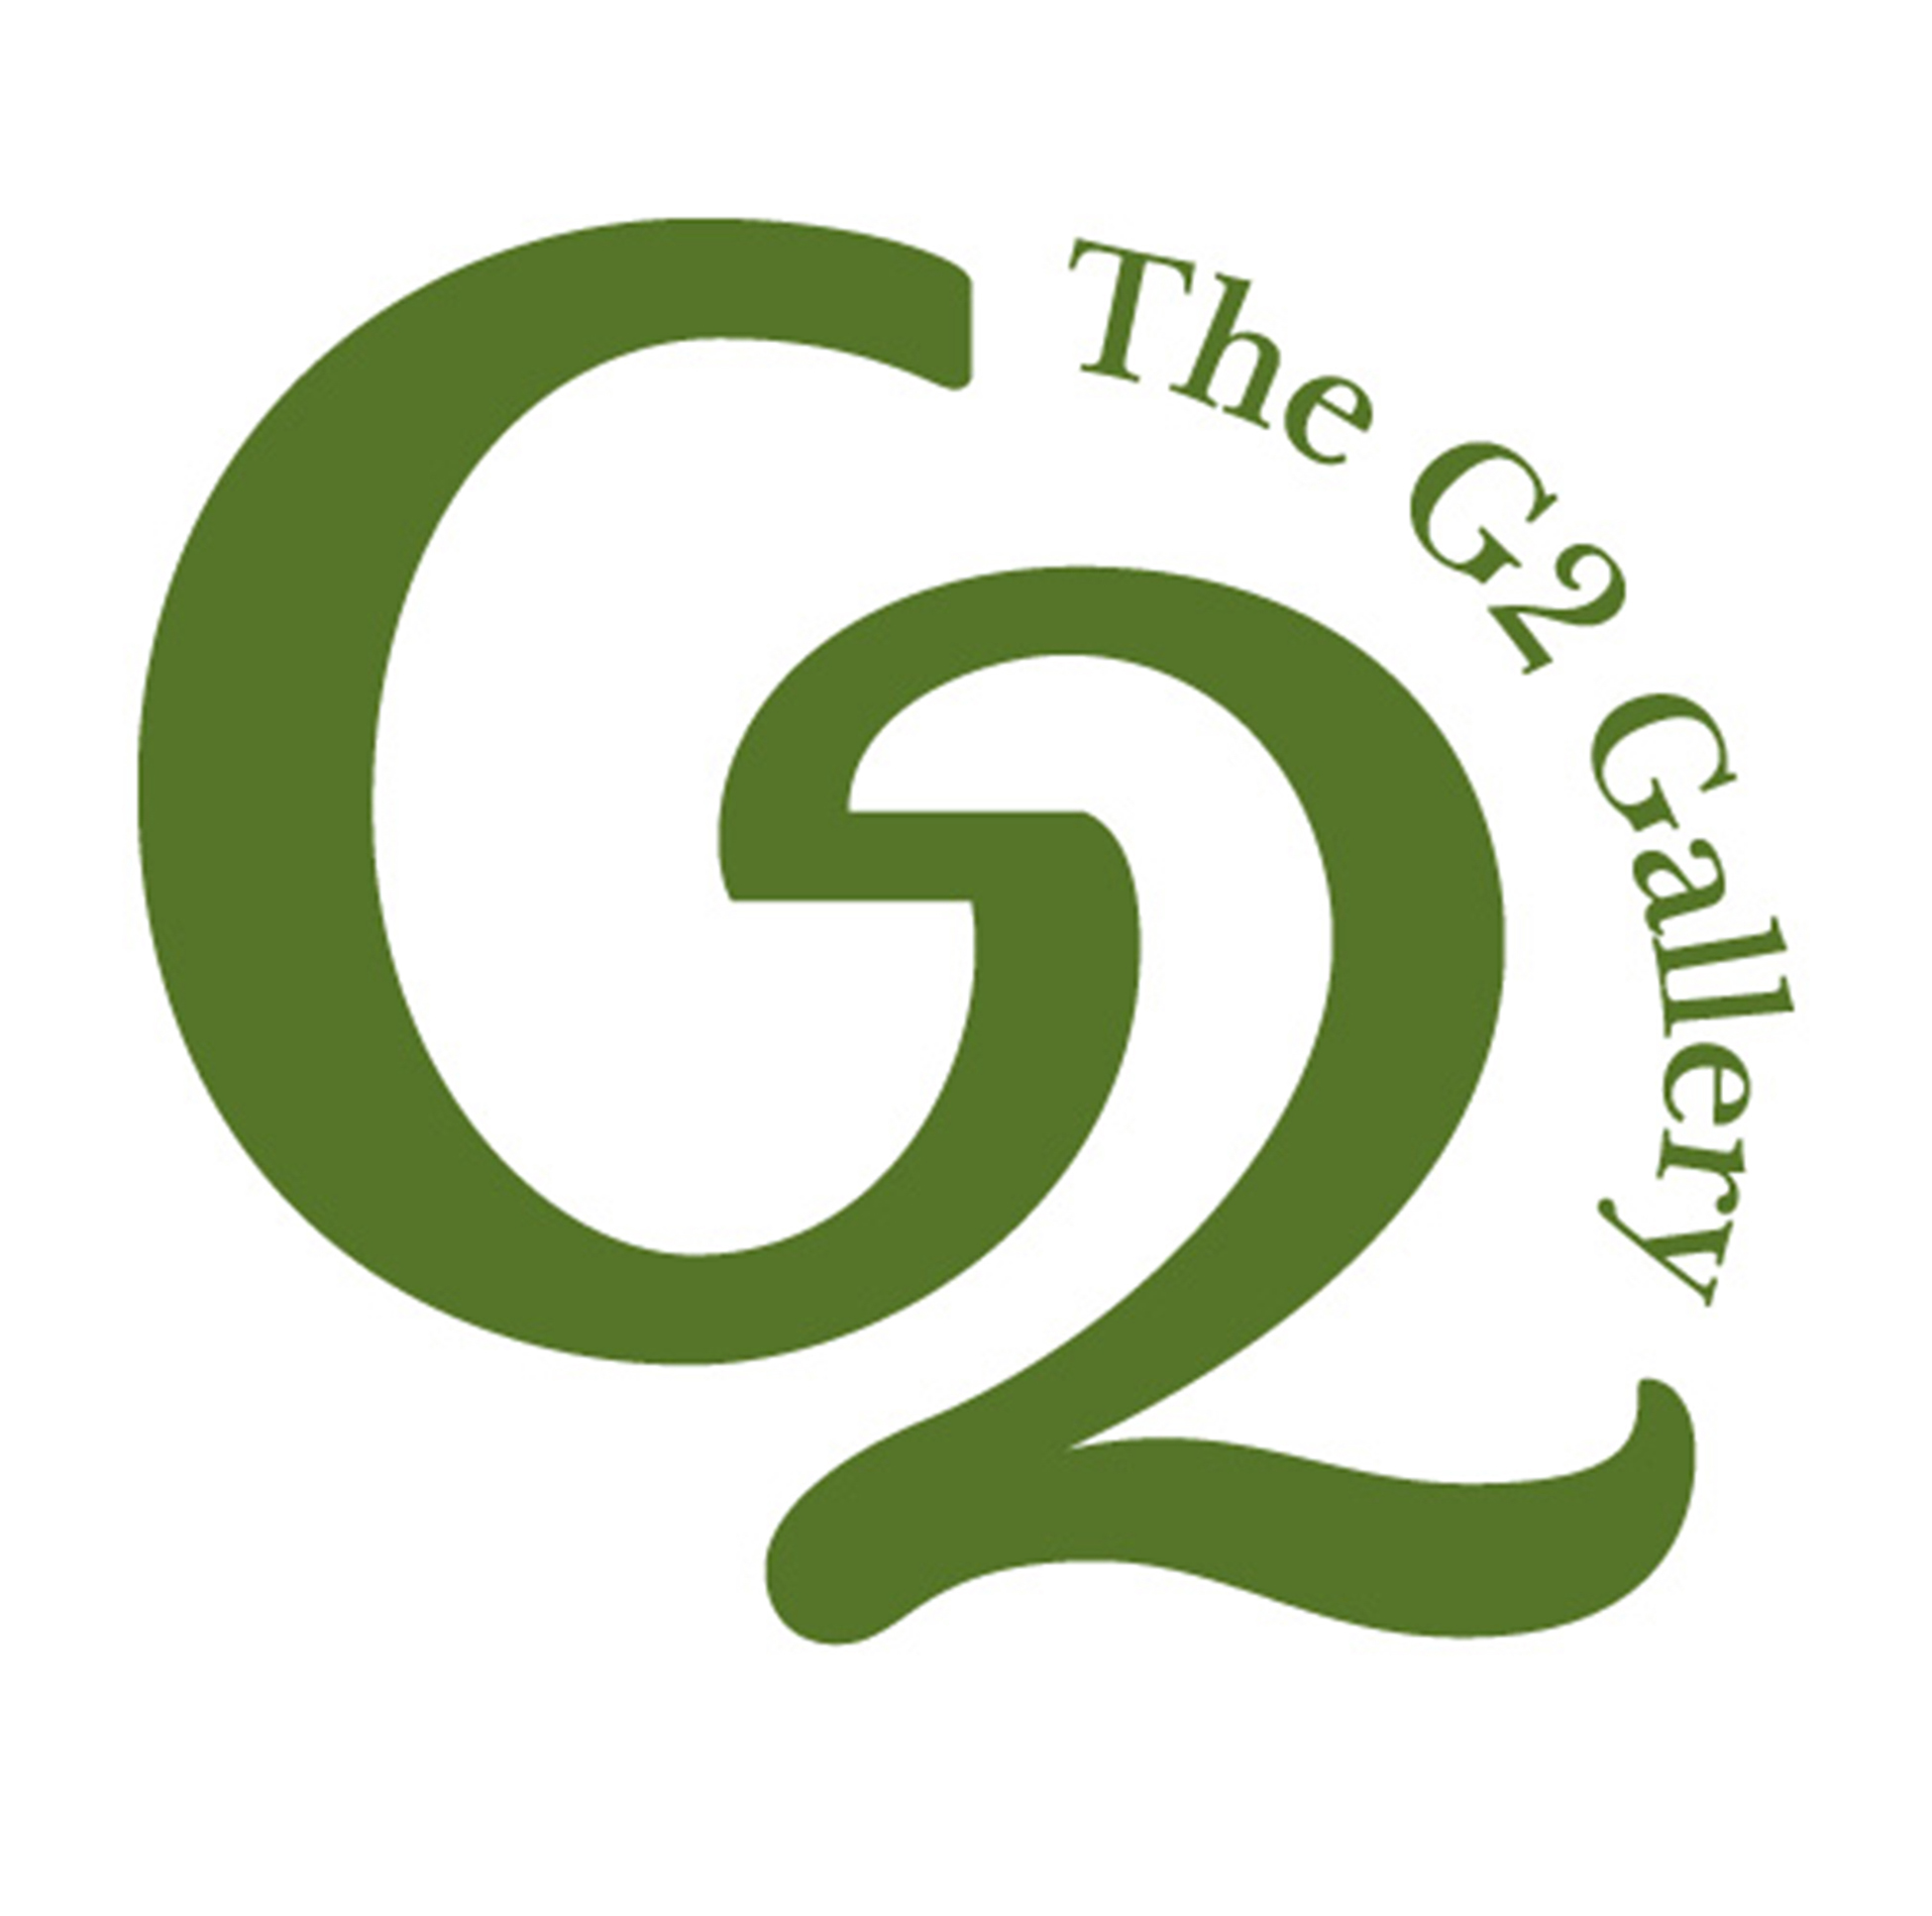 The G2 Gallery